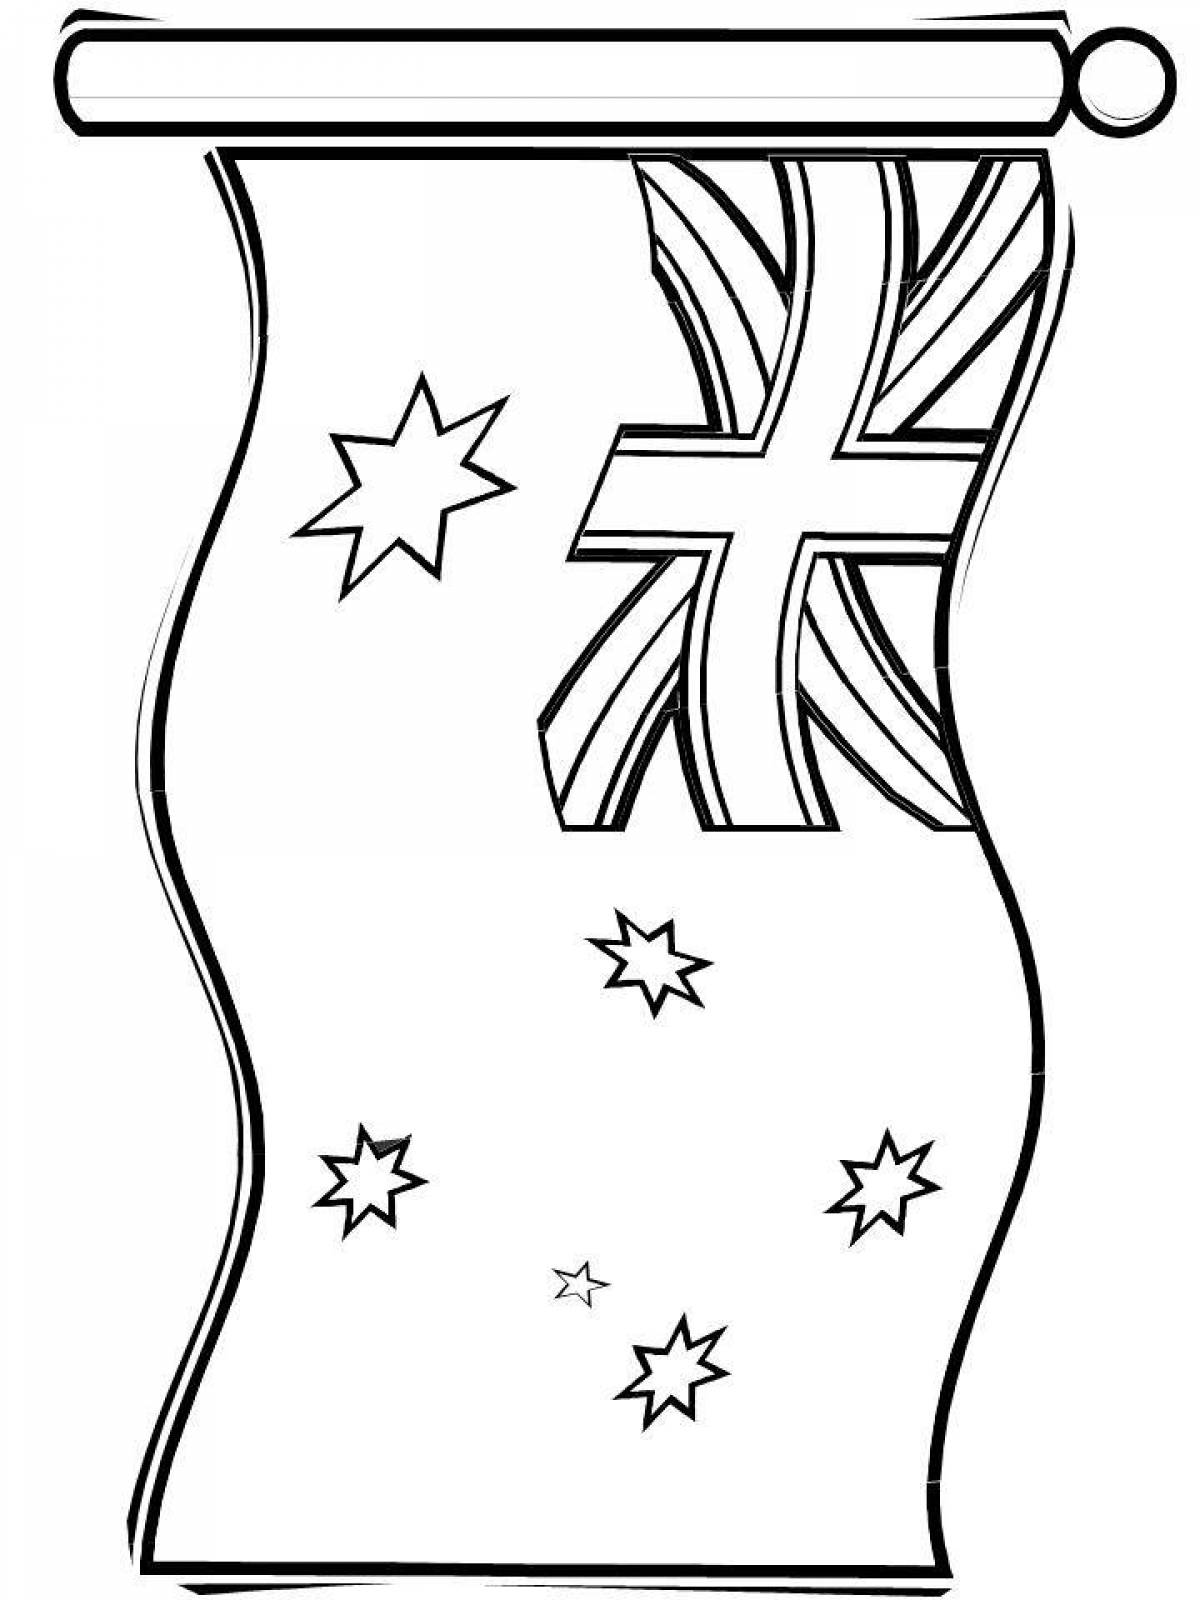 Playful australia flag coloring page